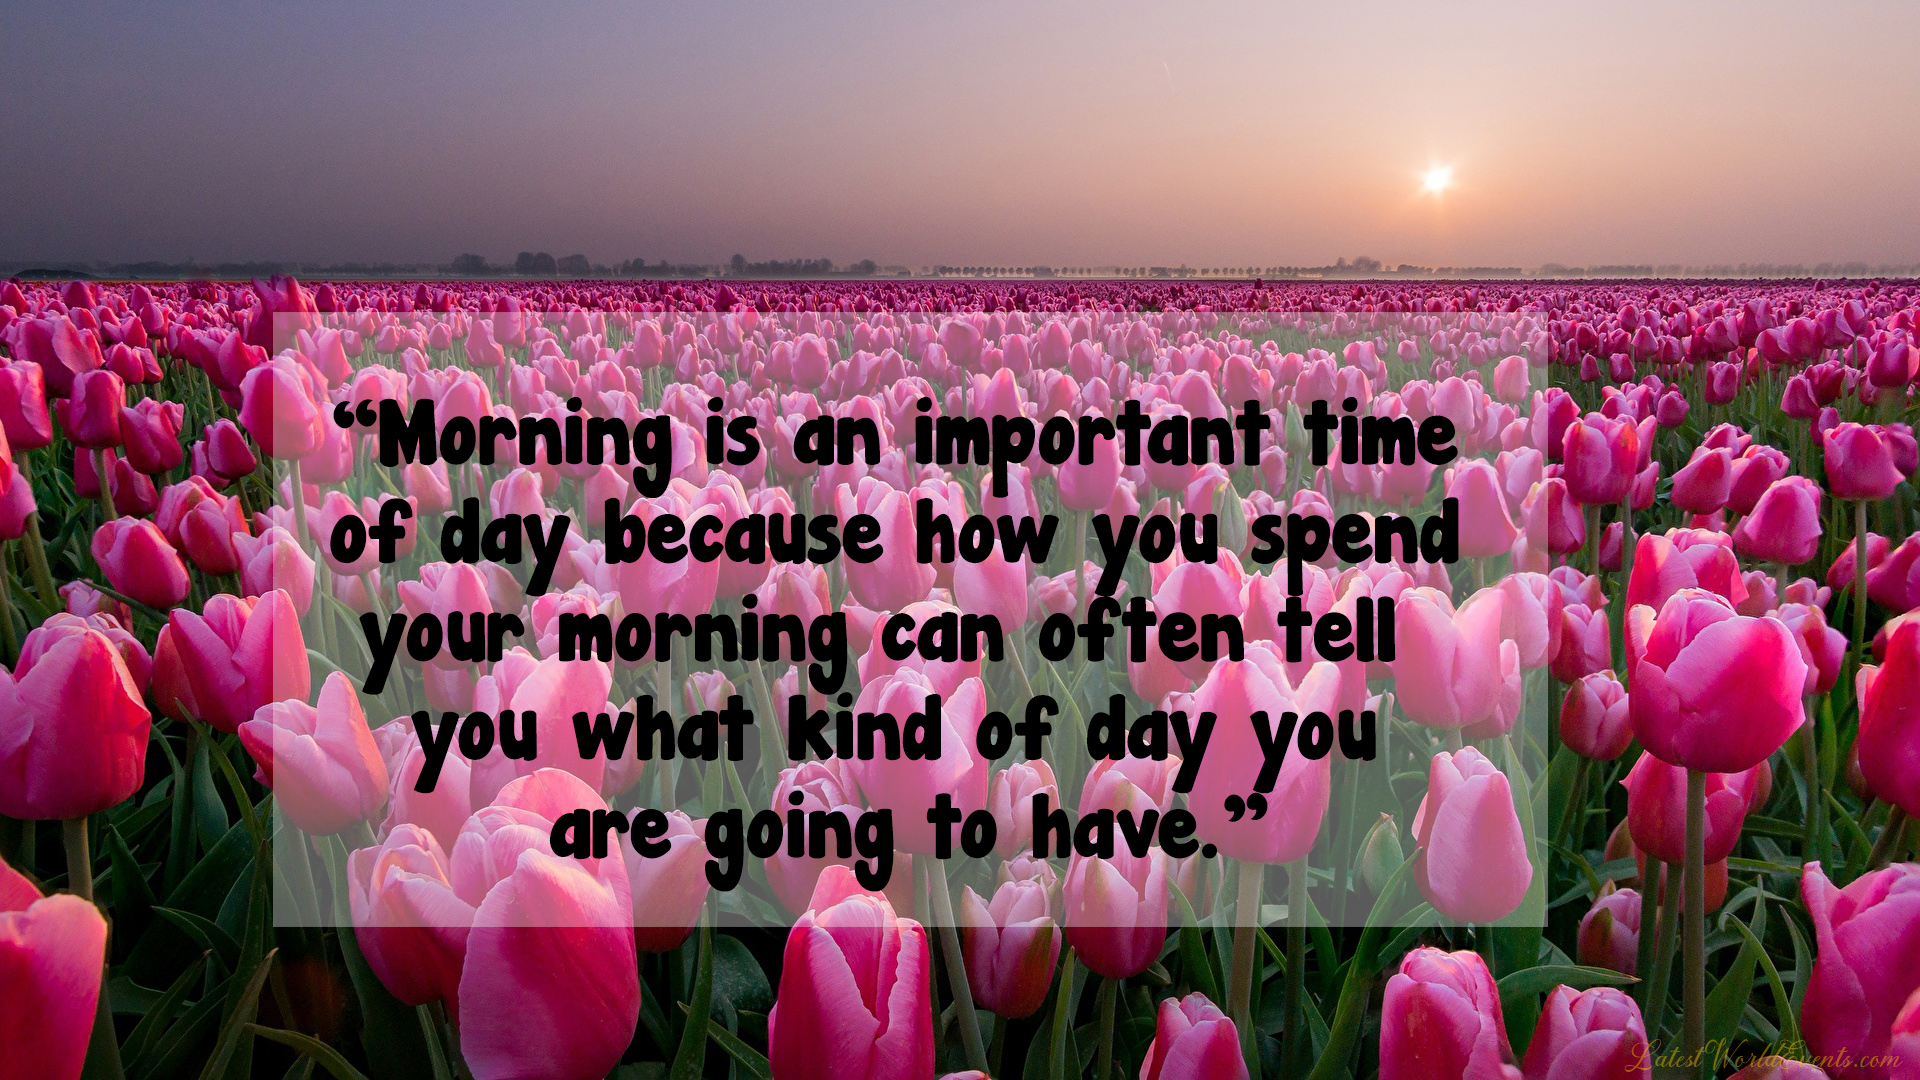 Cool-good-morning-have-a-nice-day-quotes